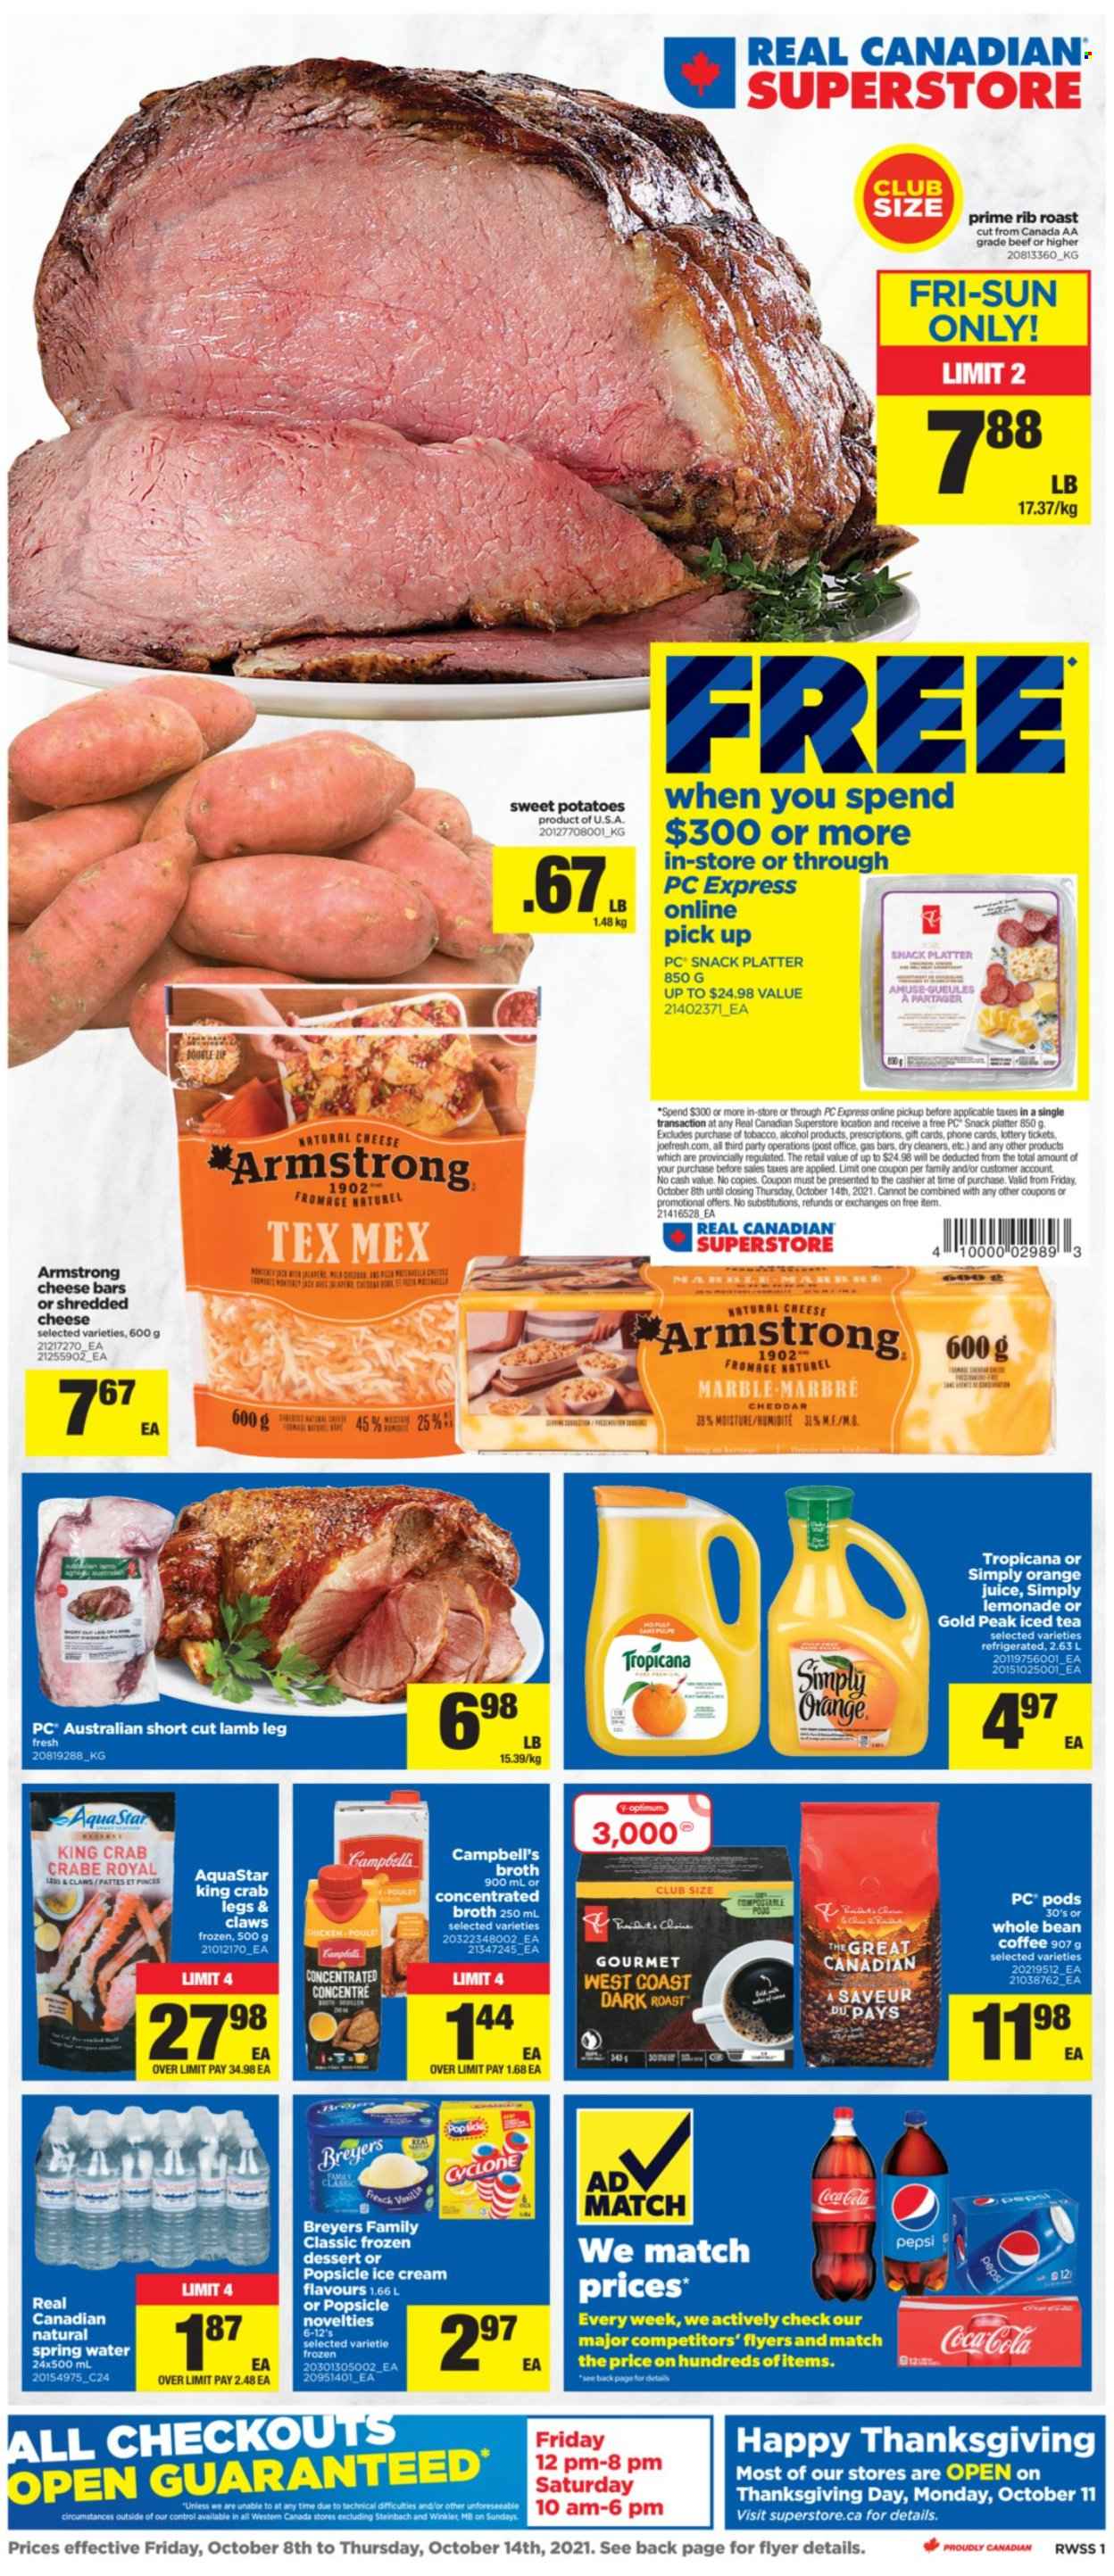 thumbnail - Real Canadian Superstore Flyer - October 08, 2021 - October 14, 2021 - Sales products - sweet potato, potatoes, king crab, crab legs, crab, Campbell's, shredded cheese, cheddar, ice cream, snack, broth, Coca-Cola, lemonade, Pepsi, orange juice, juice, ice tea, spring water, coffee, alcohol, lamb meat, lamb leg. Page 1.